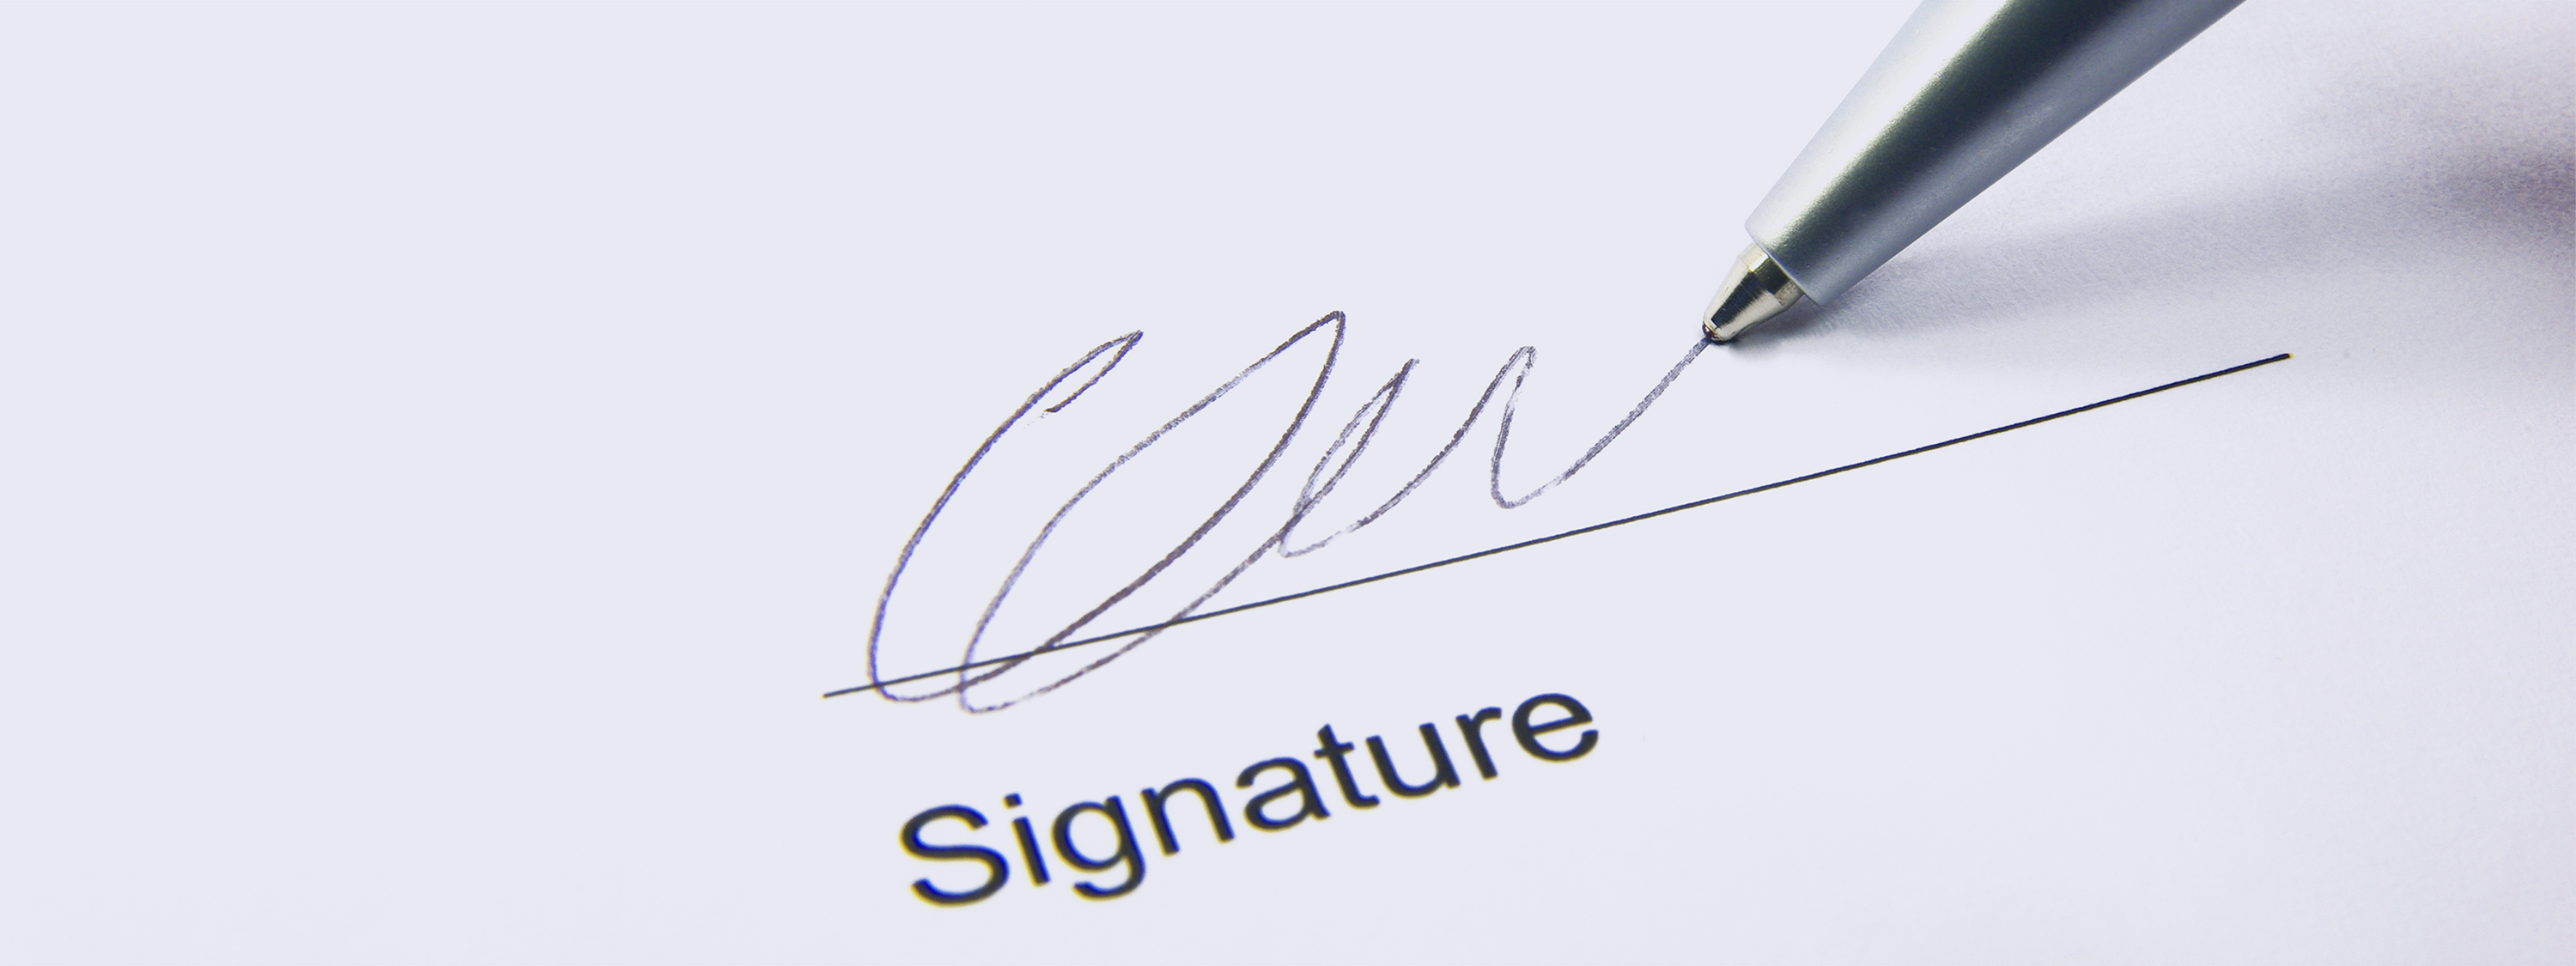 Signature on a paper